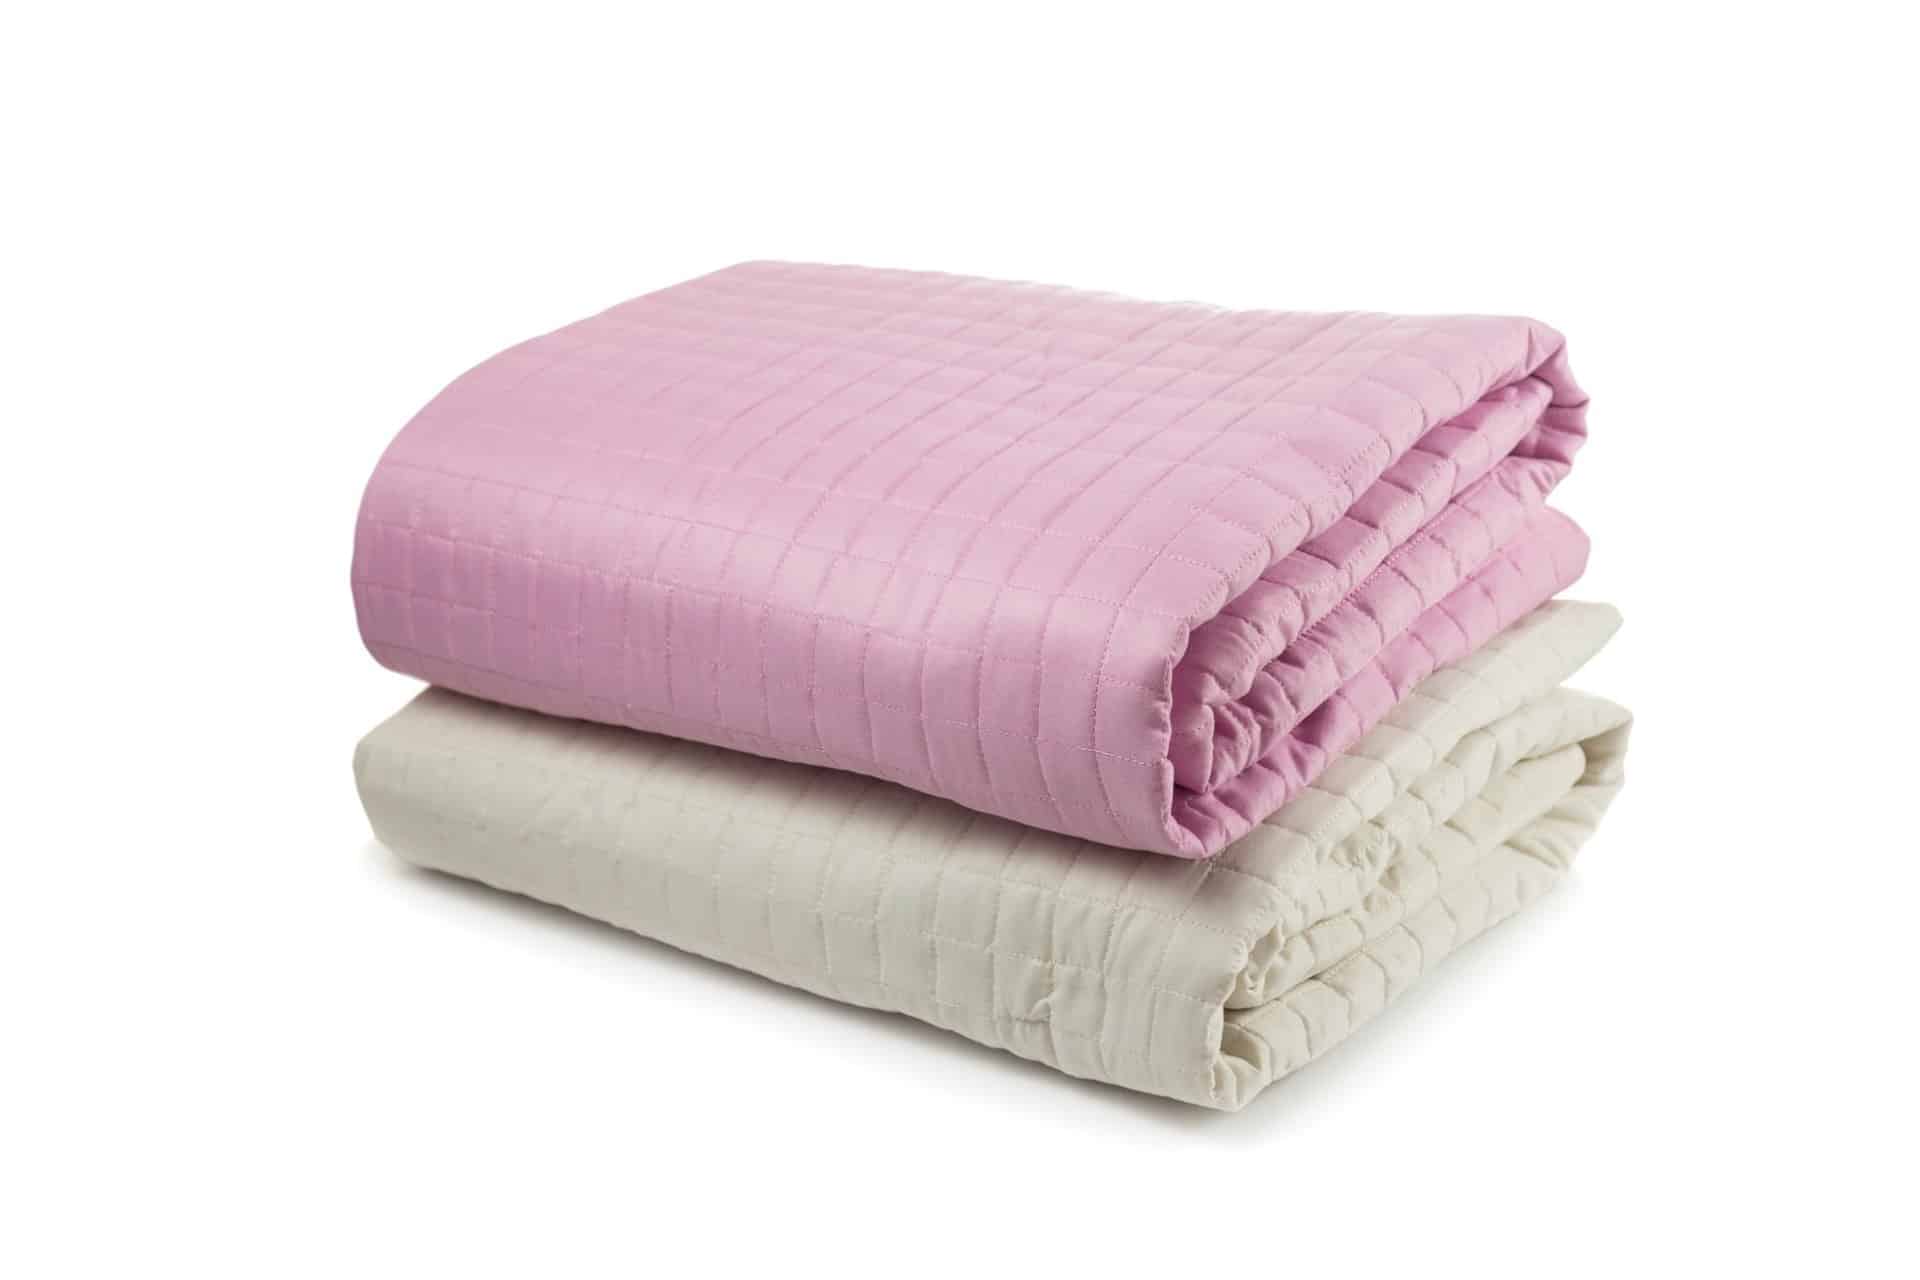 Do Weighted Blankets Help You Sleep - scaranodesigns